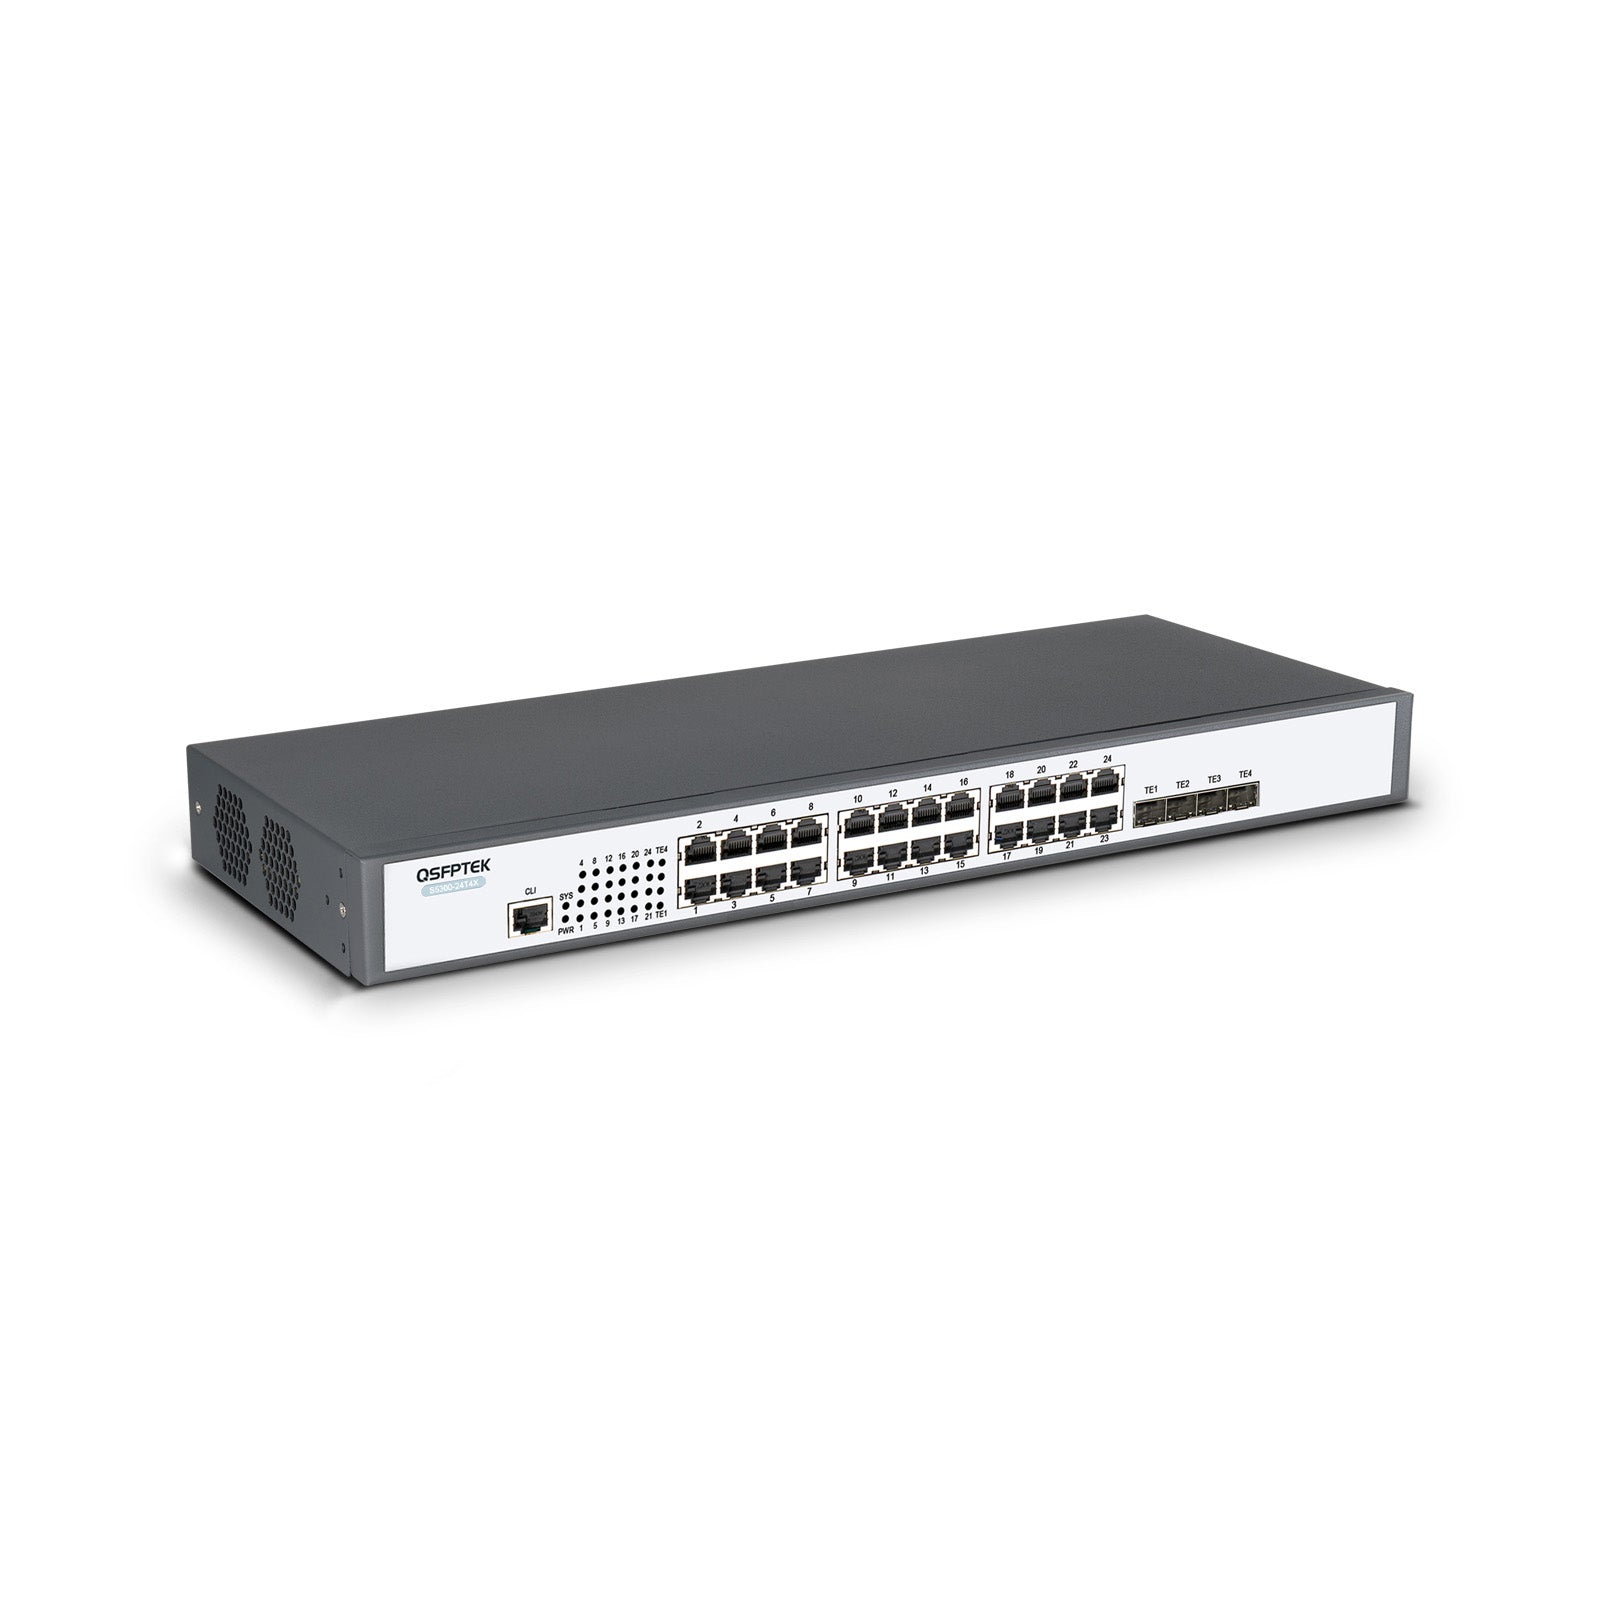 S5300-24T4X, 24-Port Ethernet L2+ Access Switch, 24x GE RJ45 Ports with 4x 10GE SFP+ Uplinks, Stackable Switch, Fanless